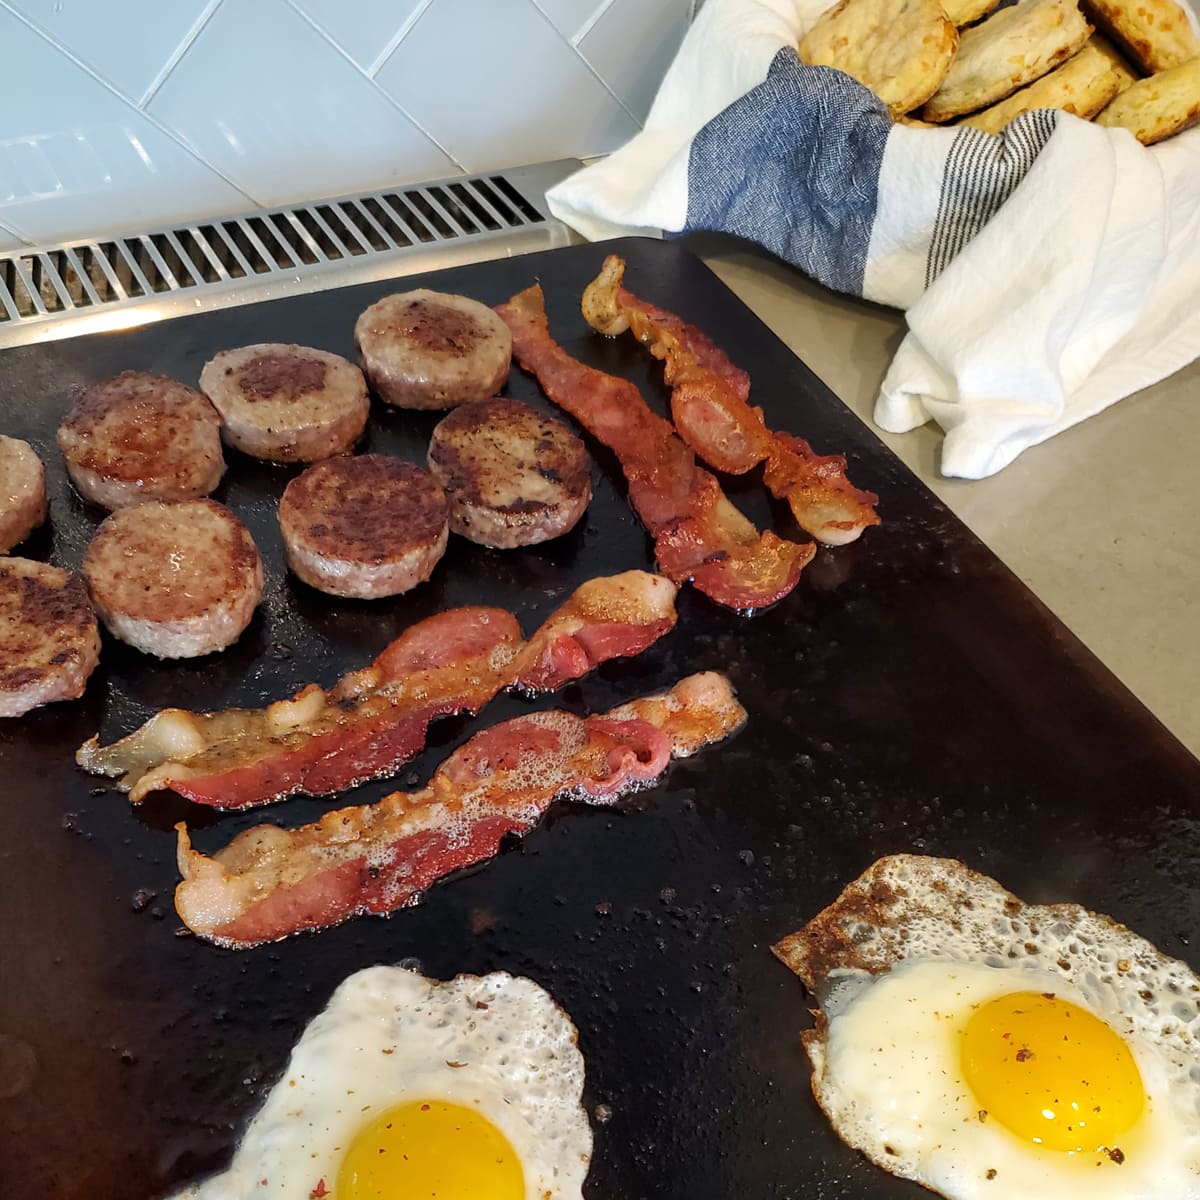 Sausage, bacon, and eggs cooking on a flat top.